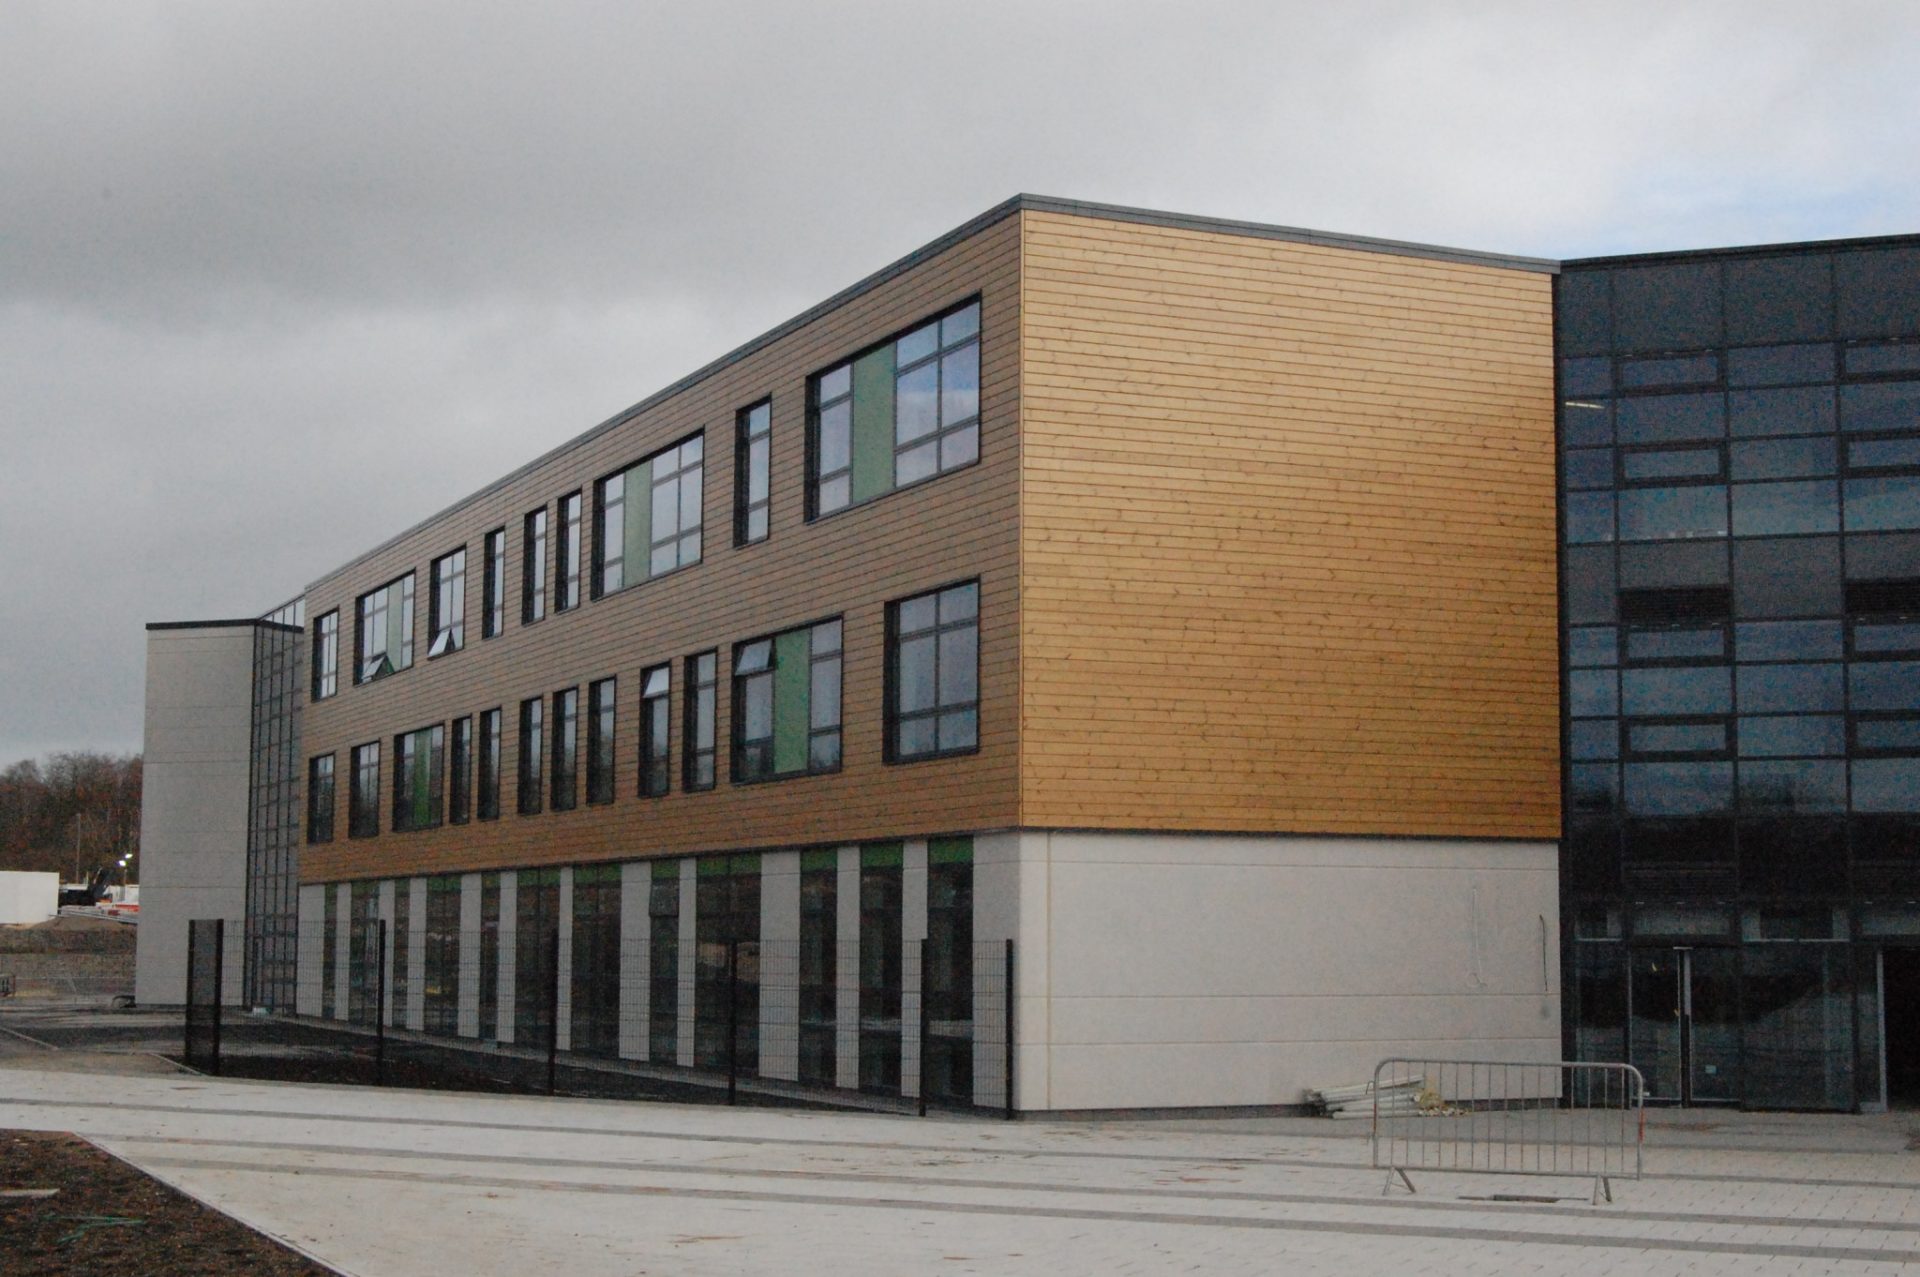 It’s a wrap – new Academy gets clad